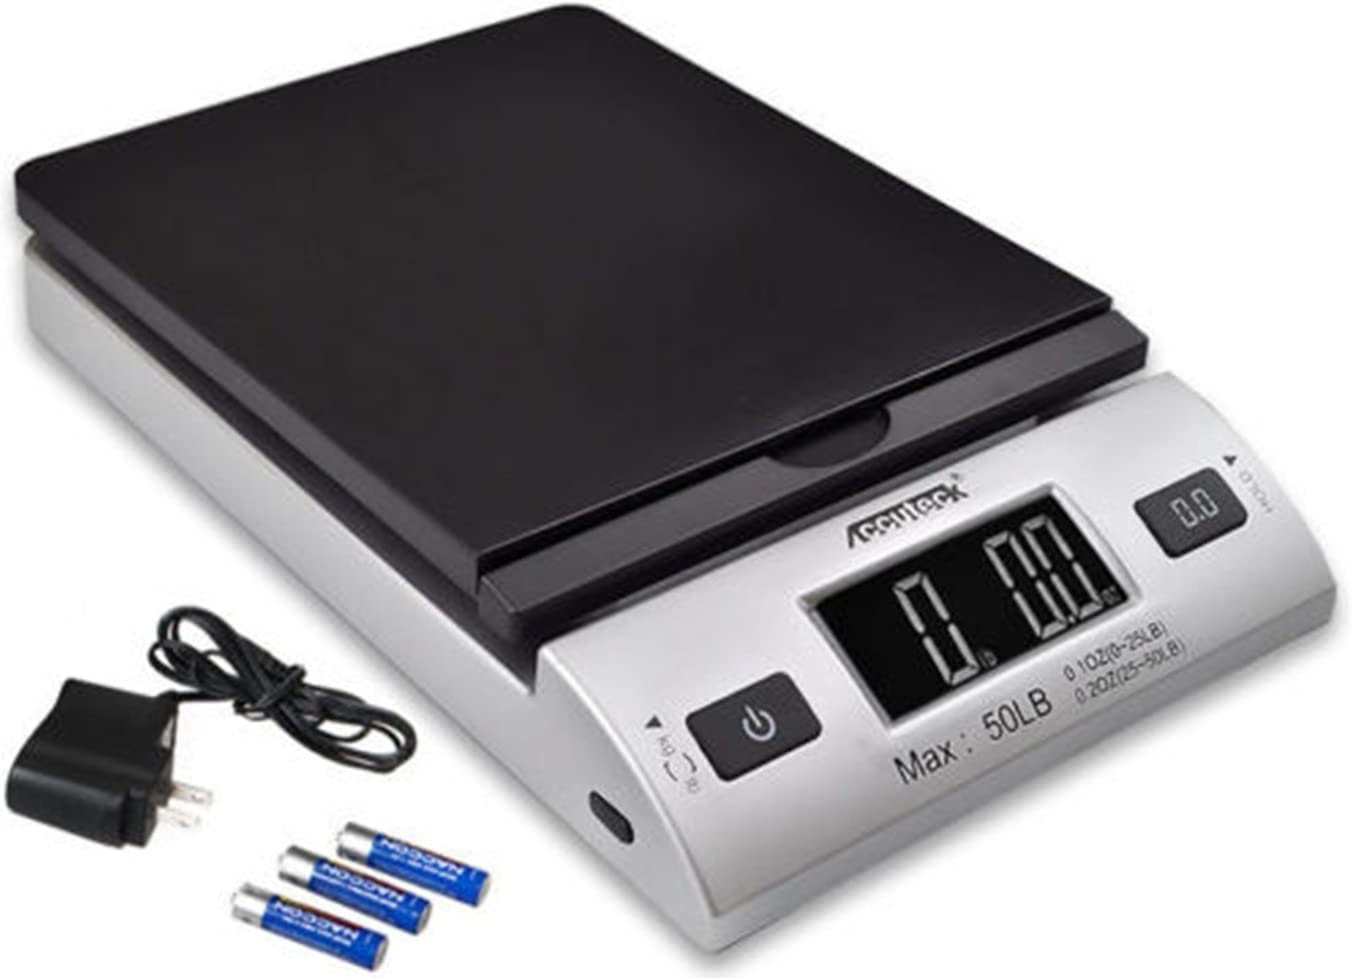 Accuteck W-8250 All-In-1 Smart Postal Scale